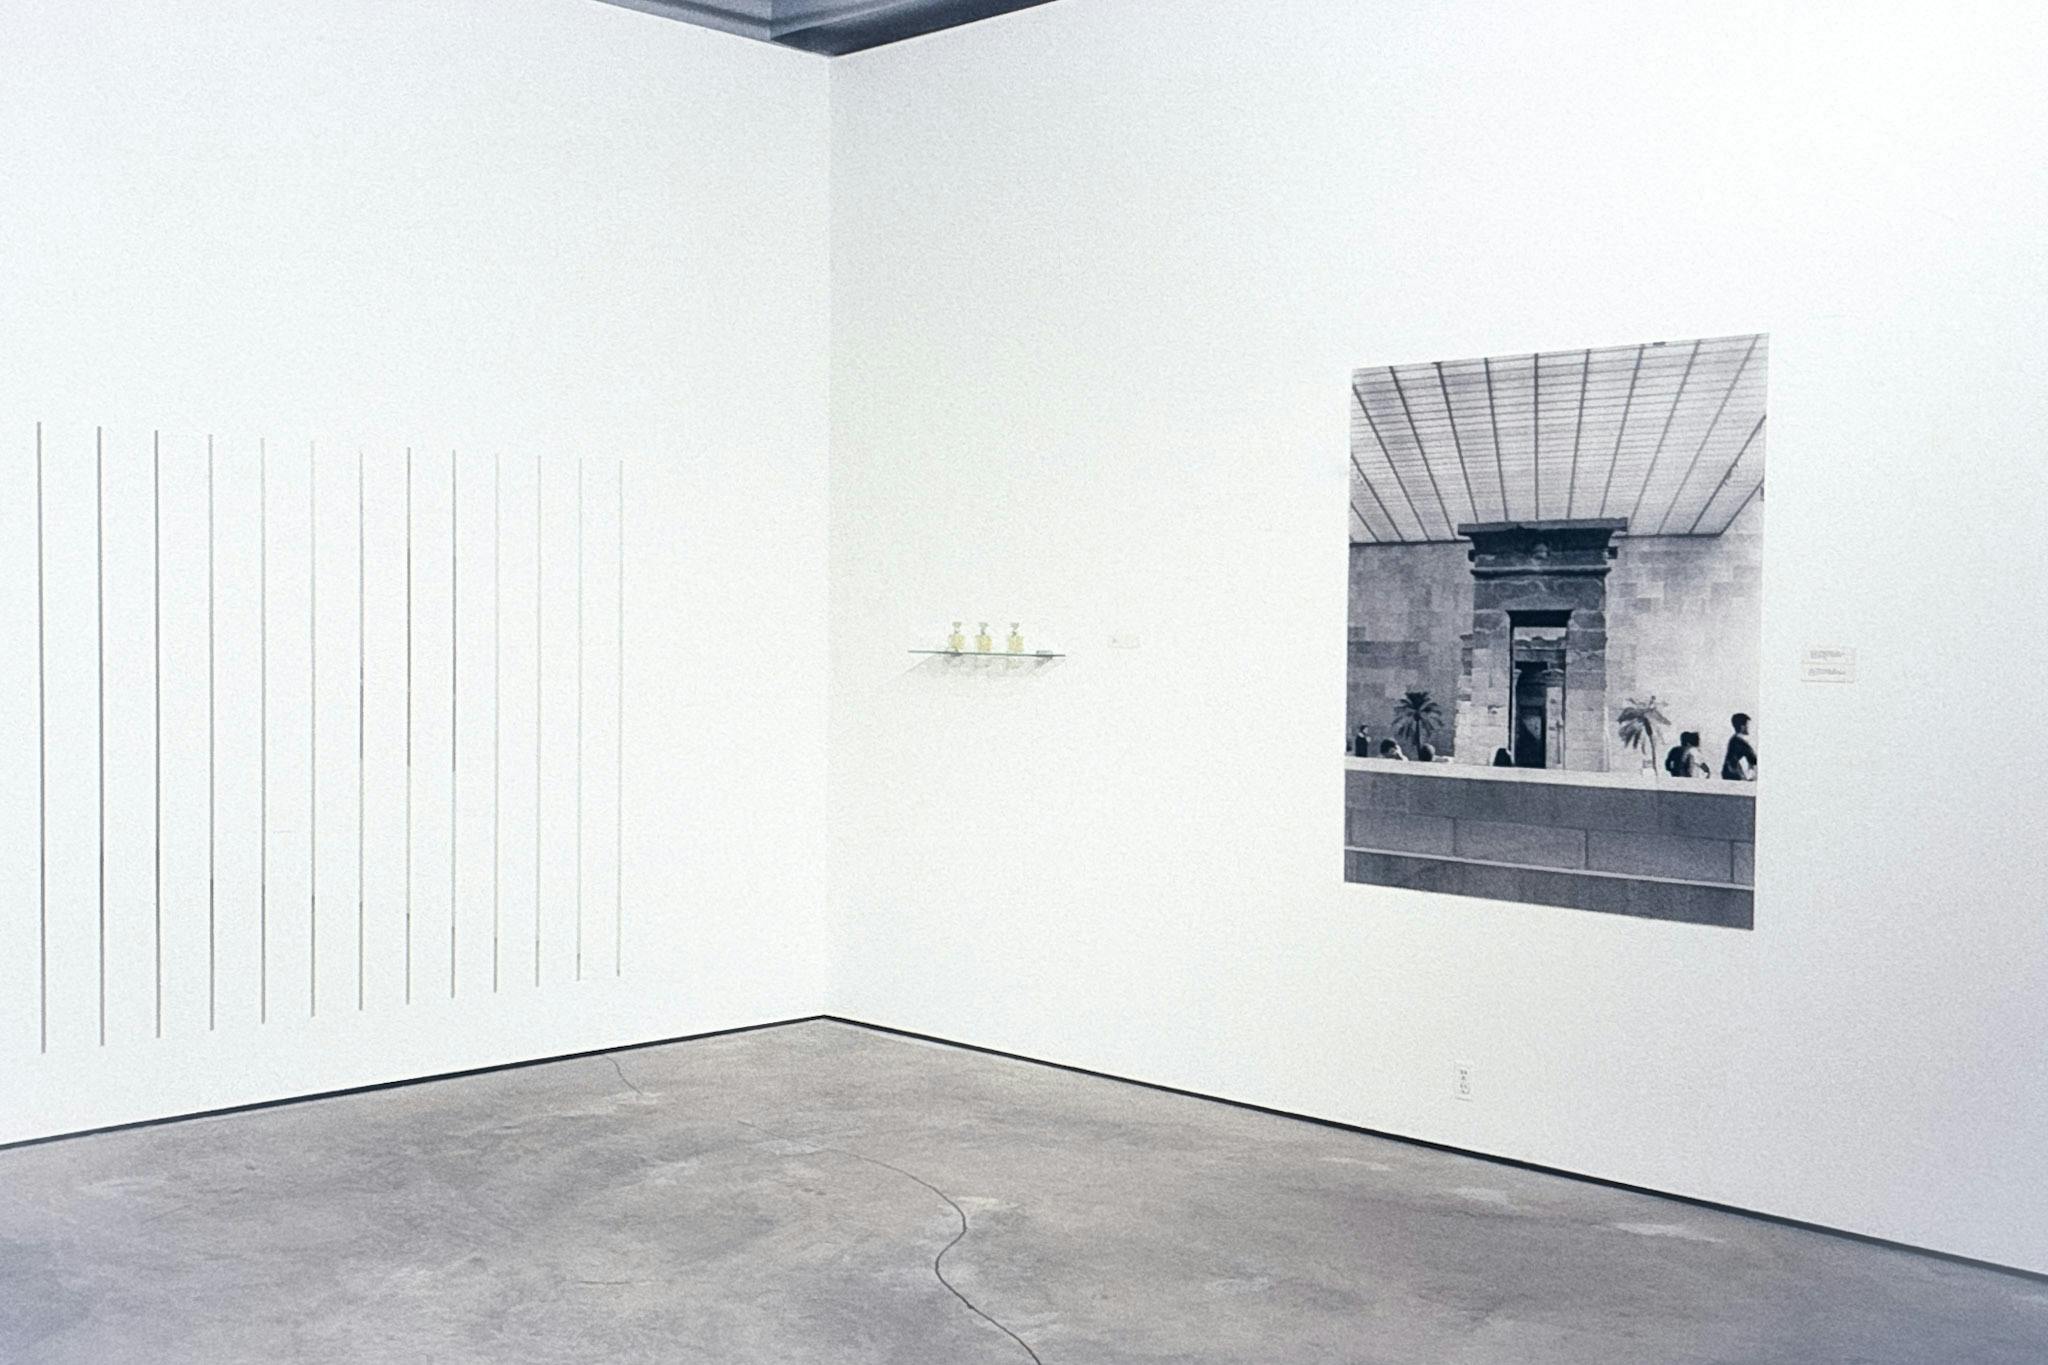 3 artworks in the corner of an art gallery. One is dark slits on a wall, one is small bottles on a glass shelf, and one is a large black and white photo of a room with brick walls and tiled ceilings. 